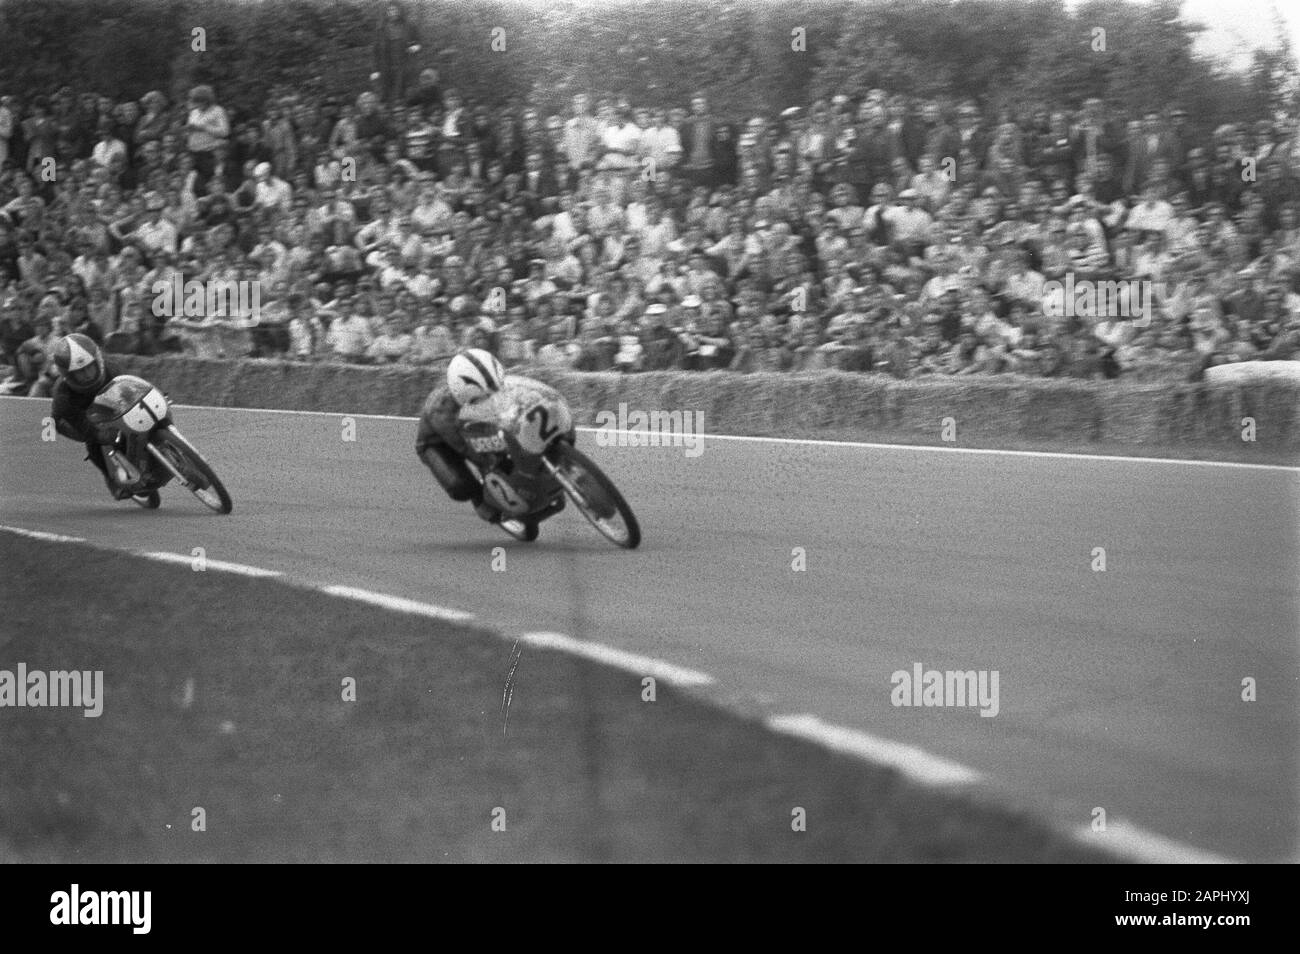 TT Assen 1972 Description: The Spanish motorcycle driver Angel Nieto (nr 2) and the Dutchman Jan de Vries in action in the 50 cc class Date: 24 June 1972 Location: Assen, Drenthe Keywords: circuits, motorcycle drivers, motorcycles, motorsports, races Personal name: Nieto, Angel, Vries, Jan de, Vries, Jan de (motorcycle driver) Stock Photo